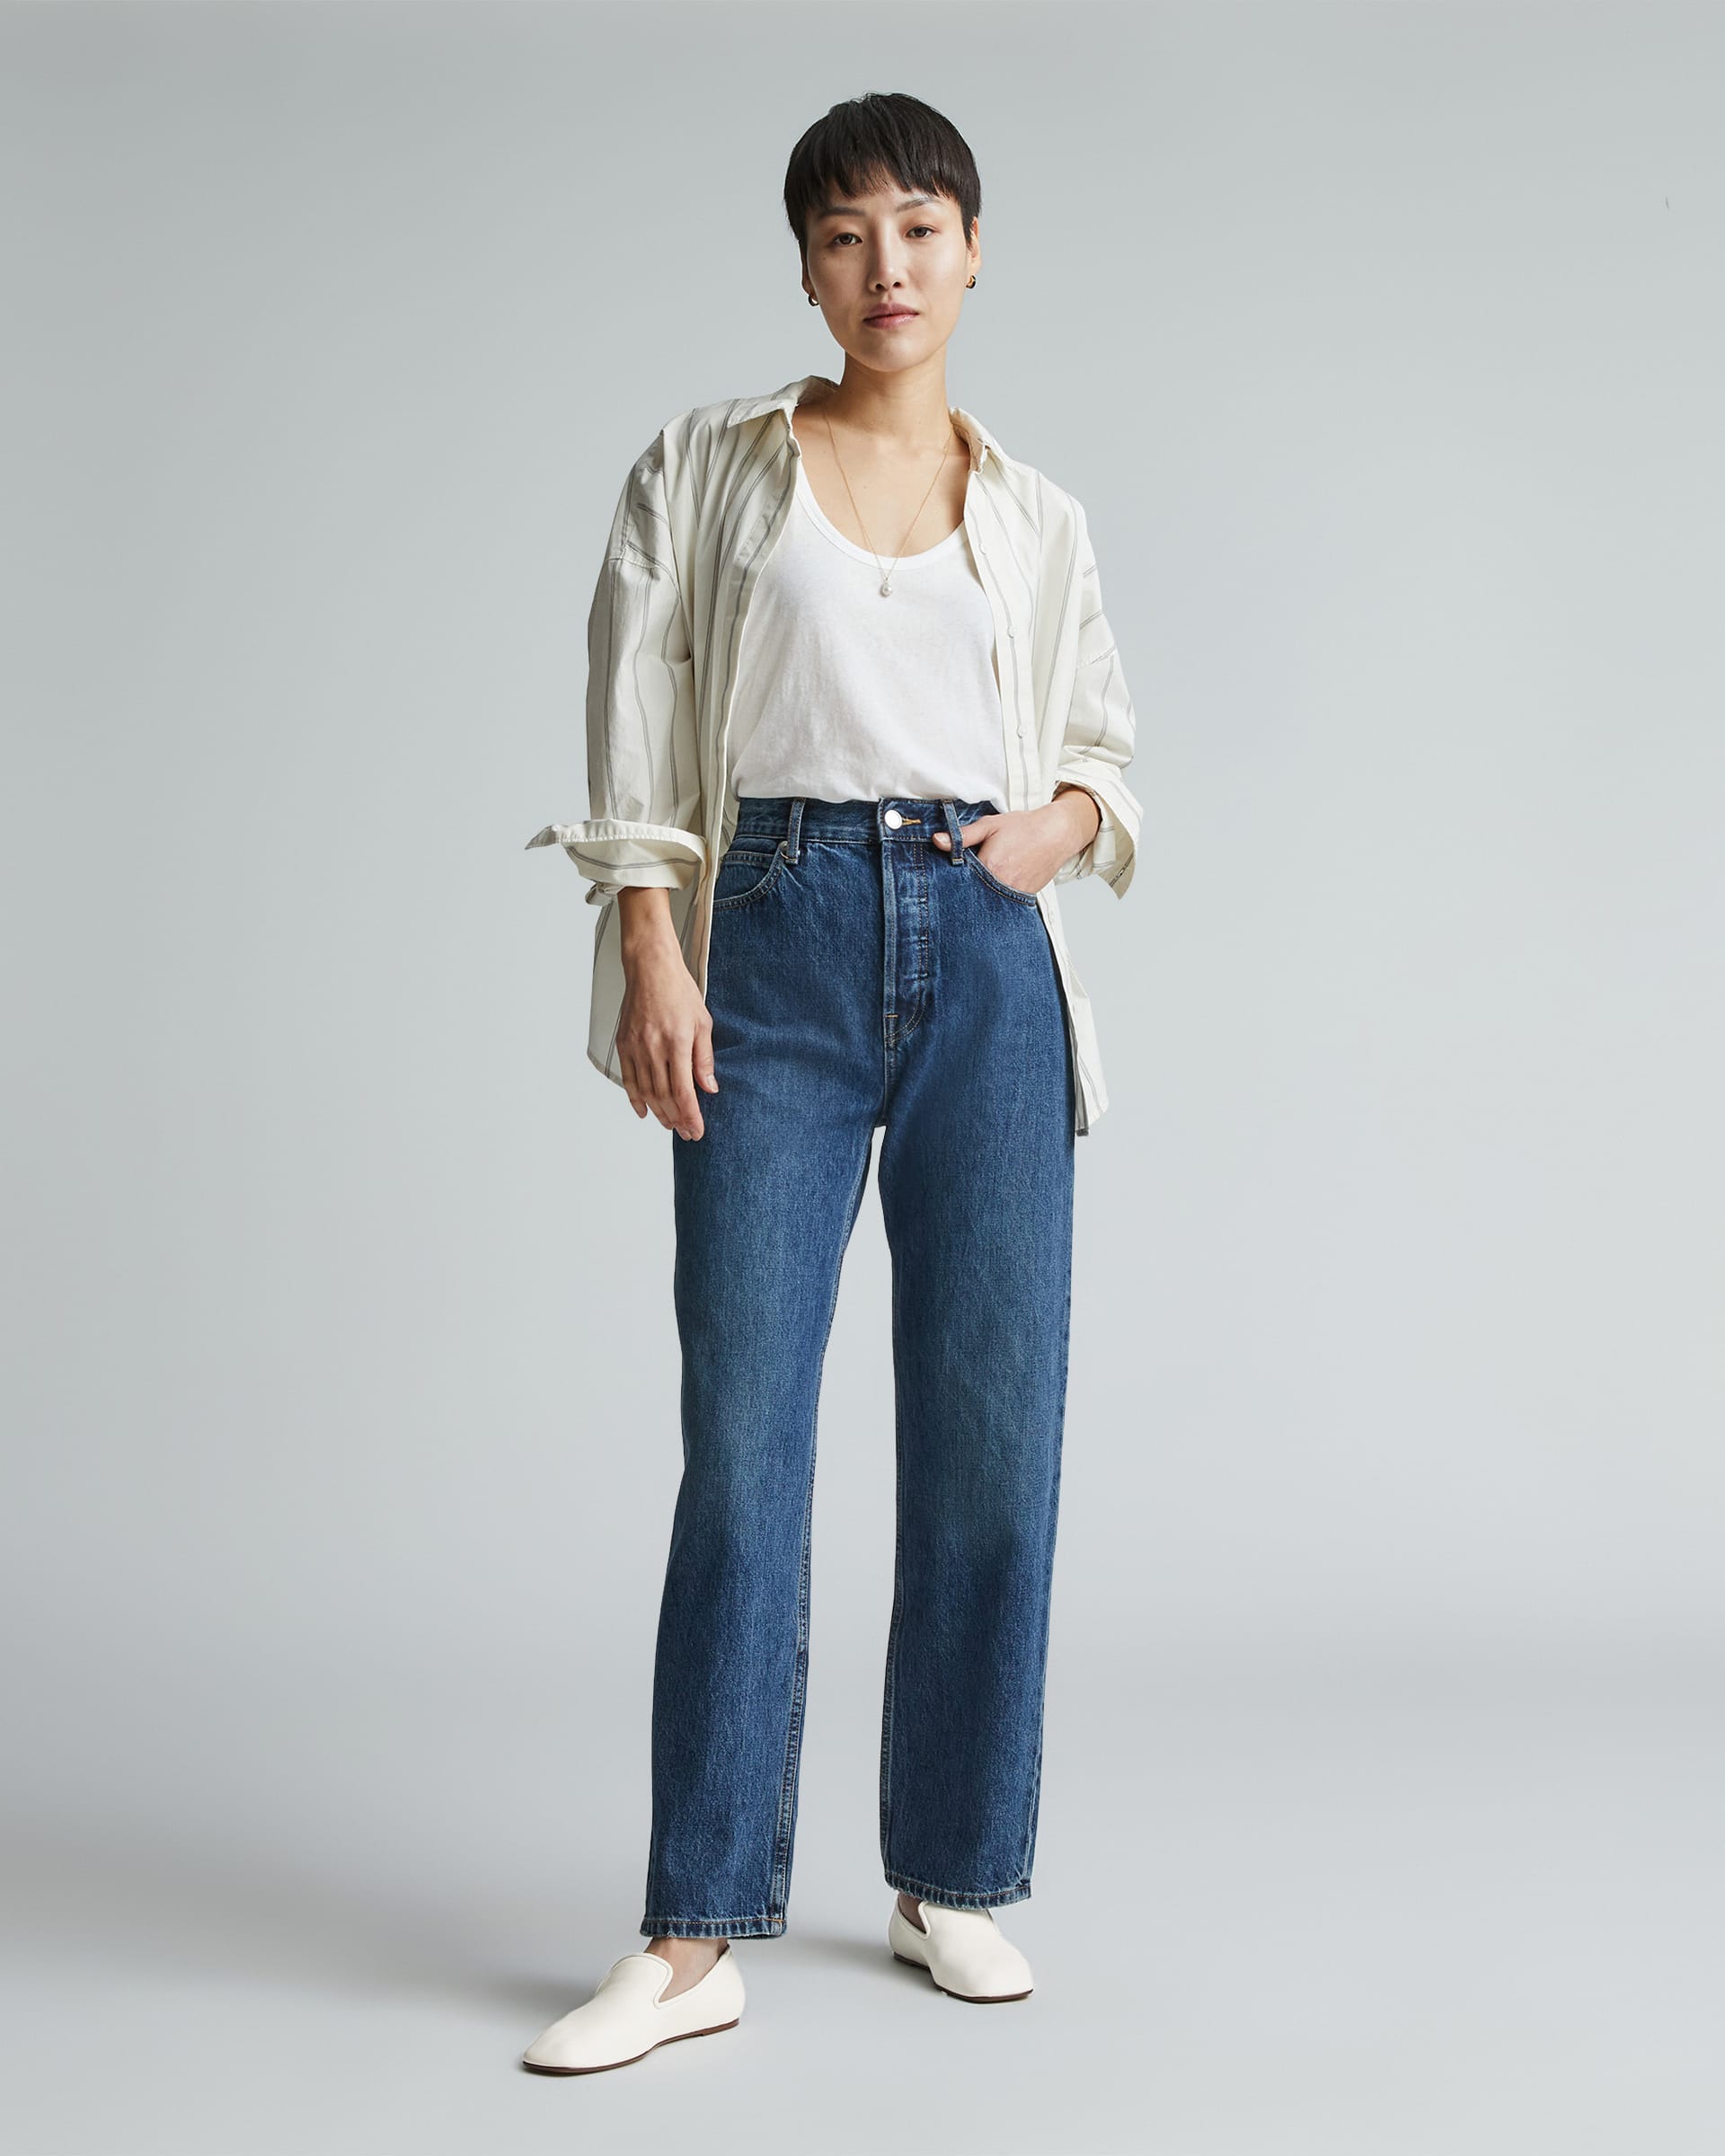 The Day Loafer Canvas – Everlane